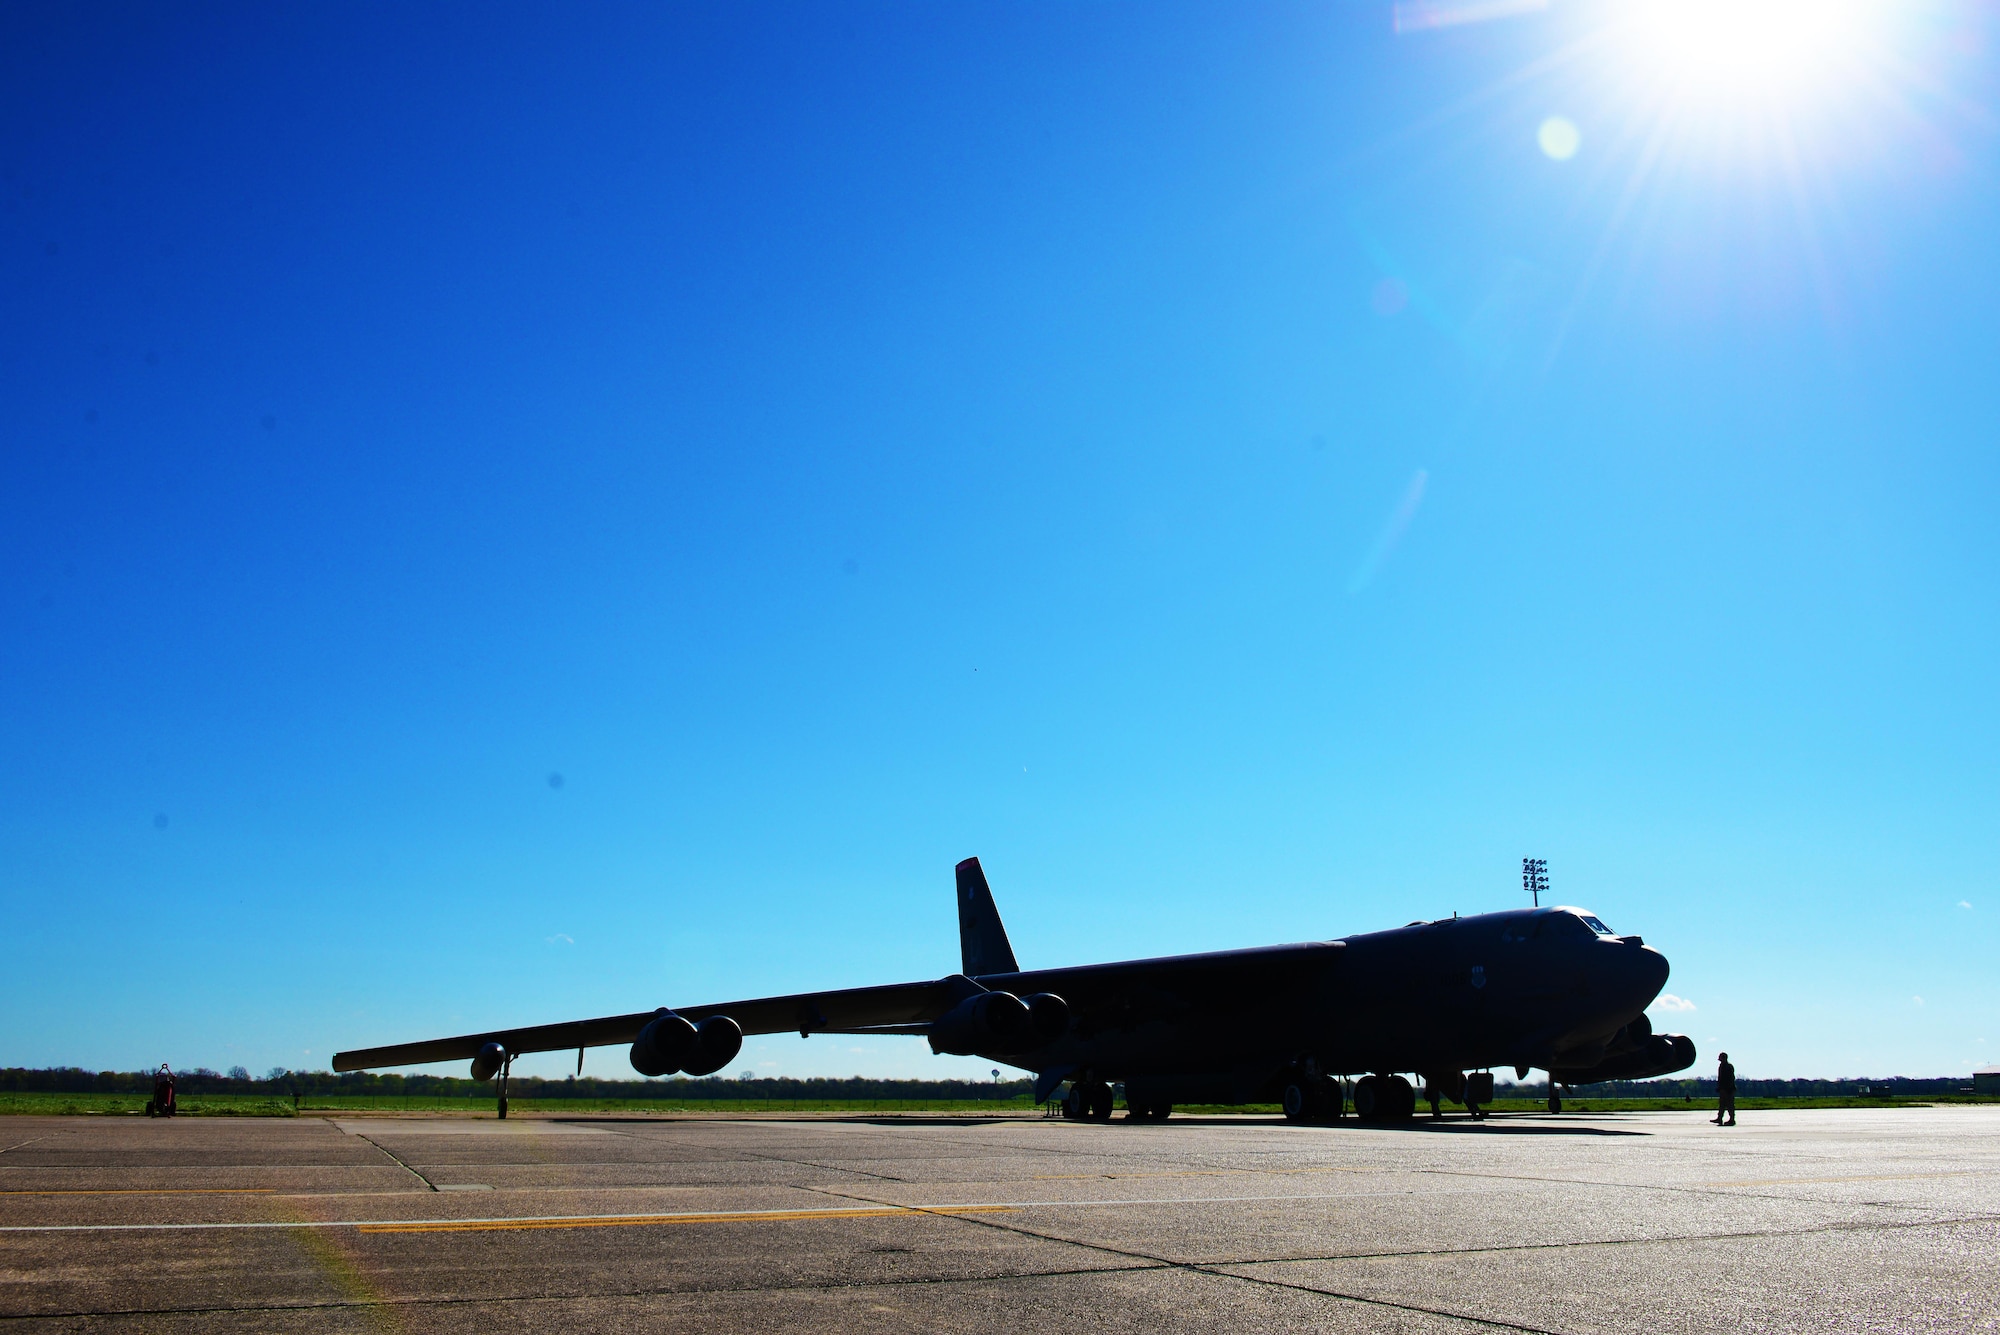 A B-52 Stratofortress was inspected before takeoff at Barksdale Air Force Base, La., March 22, 2016. To highlight the contribution of women who have served our country and to honor women’s history month, two B-52’s will be flown by all-female Air Crew. (U.S. Air Force photo/Airman 1st Class Luke Hill)